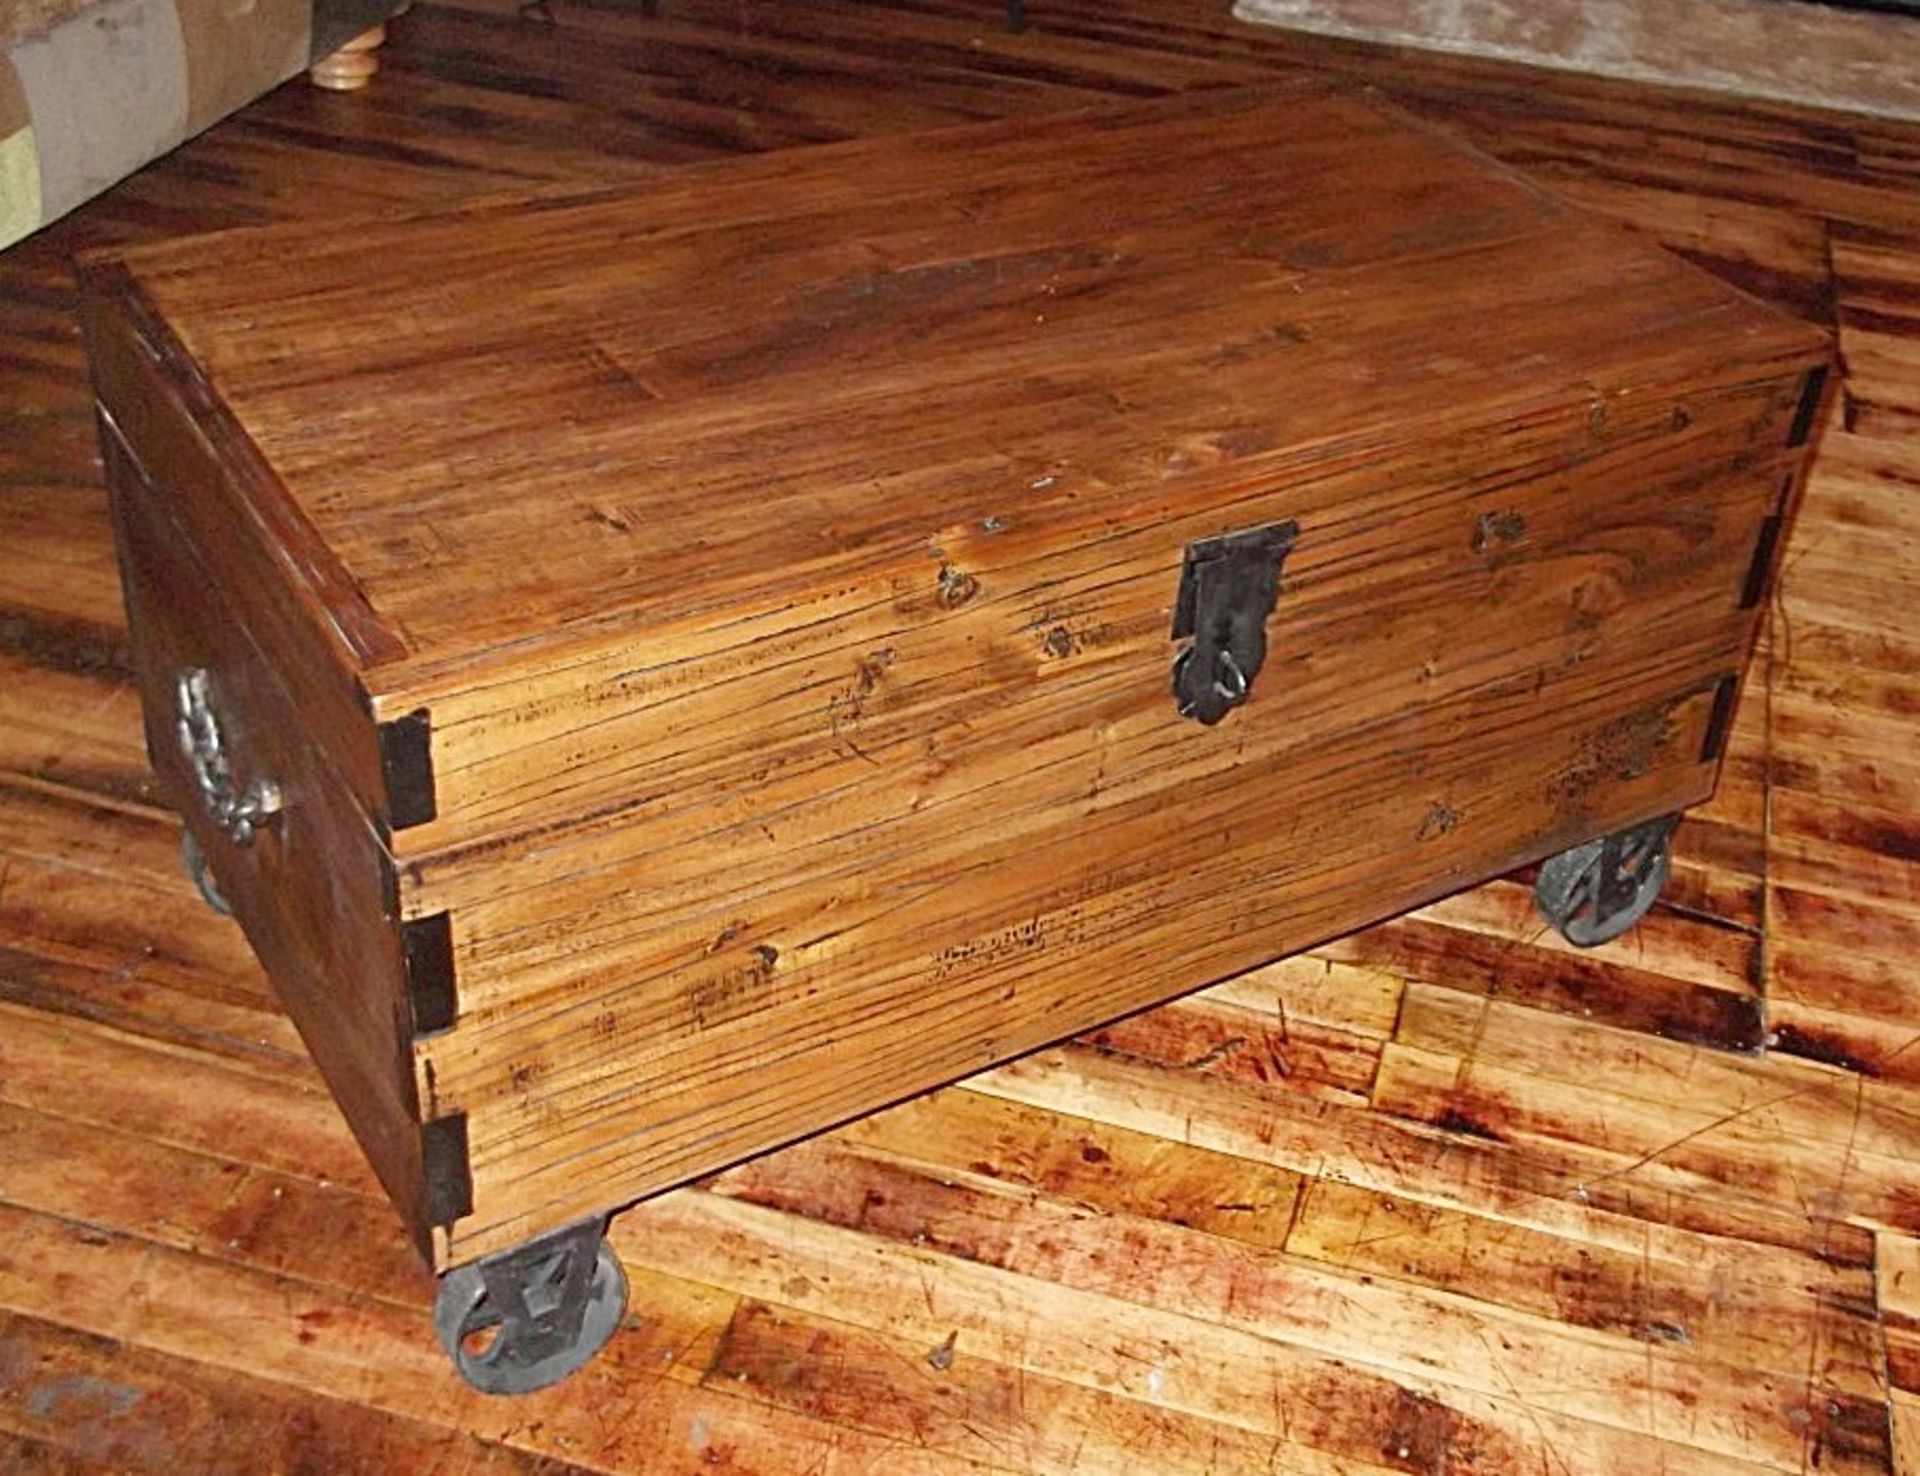 1 x Handcrafted Solid Wood Trunk Coffee Table / Storage Chest - Features Chain Handles & Metal